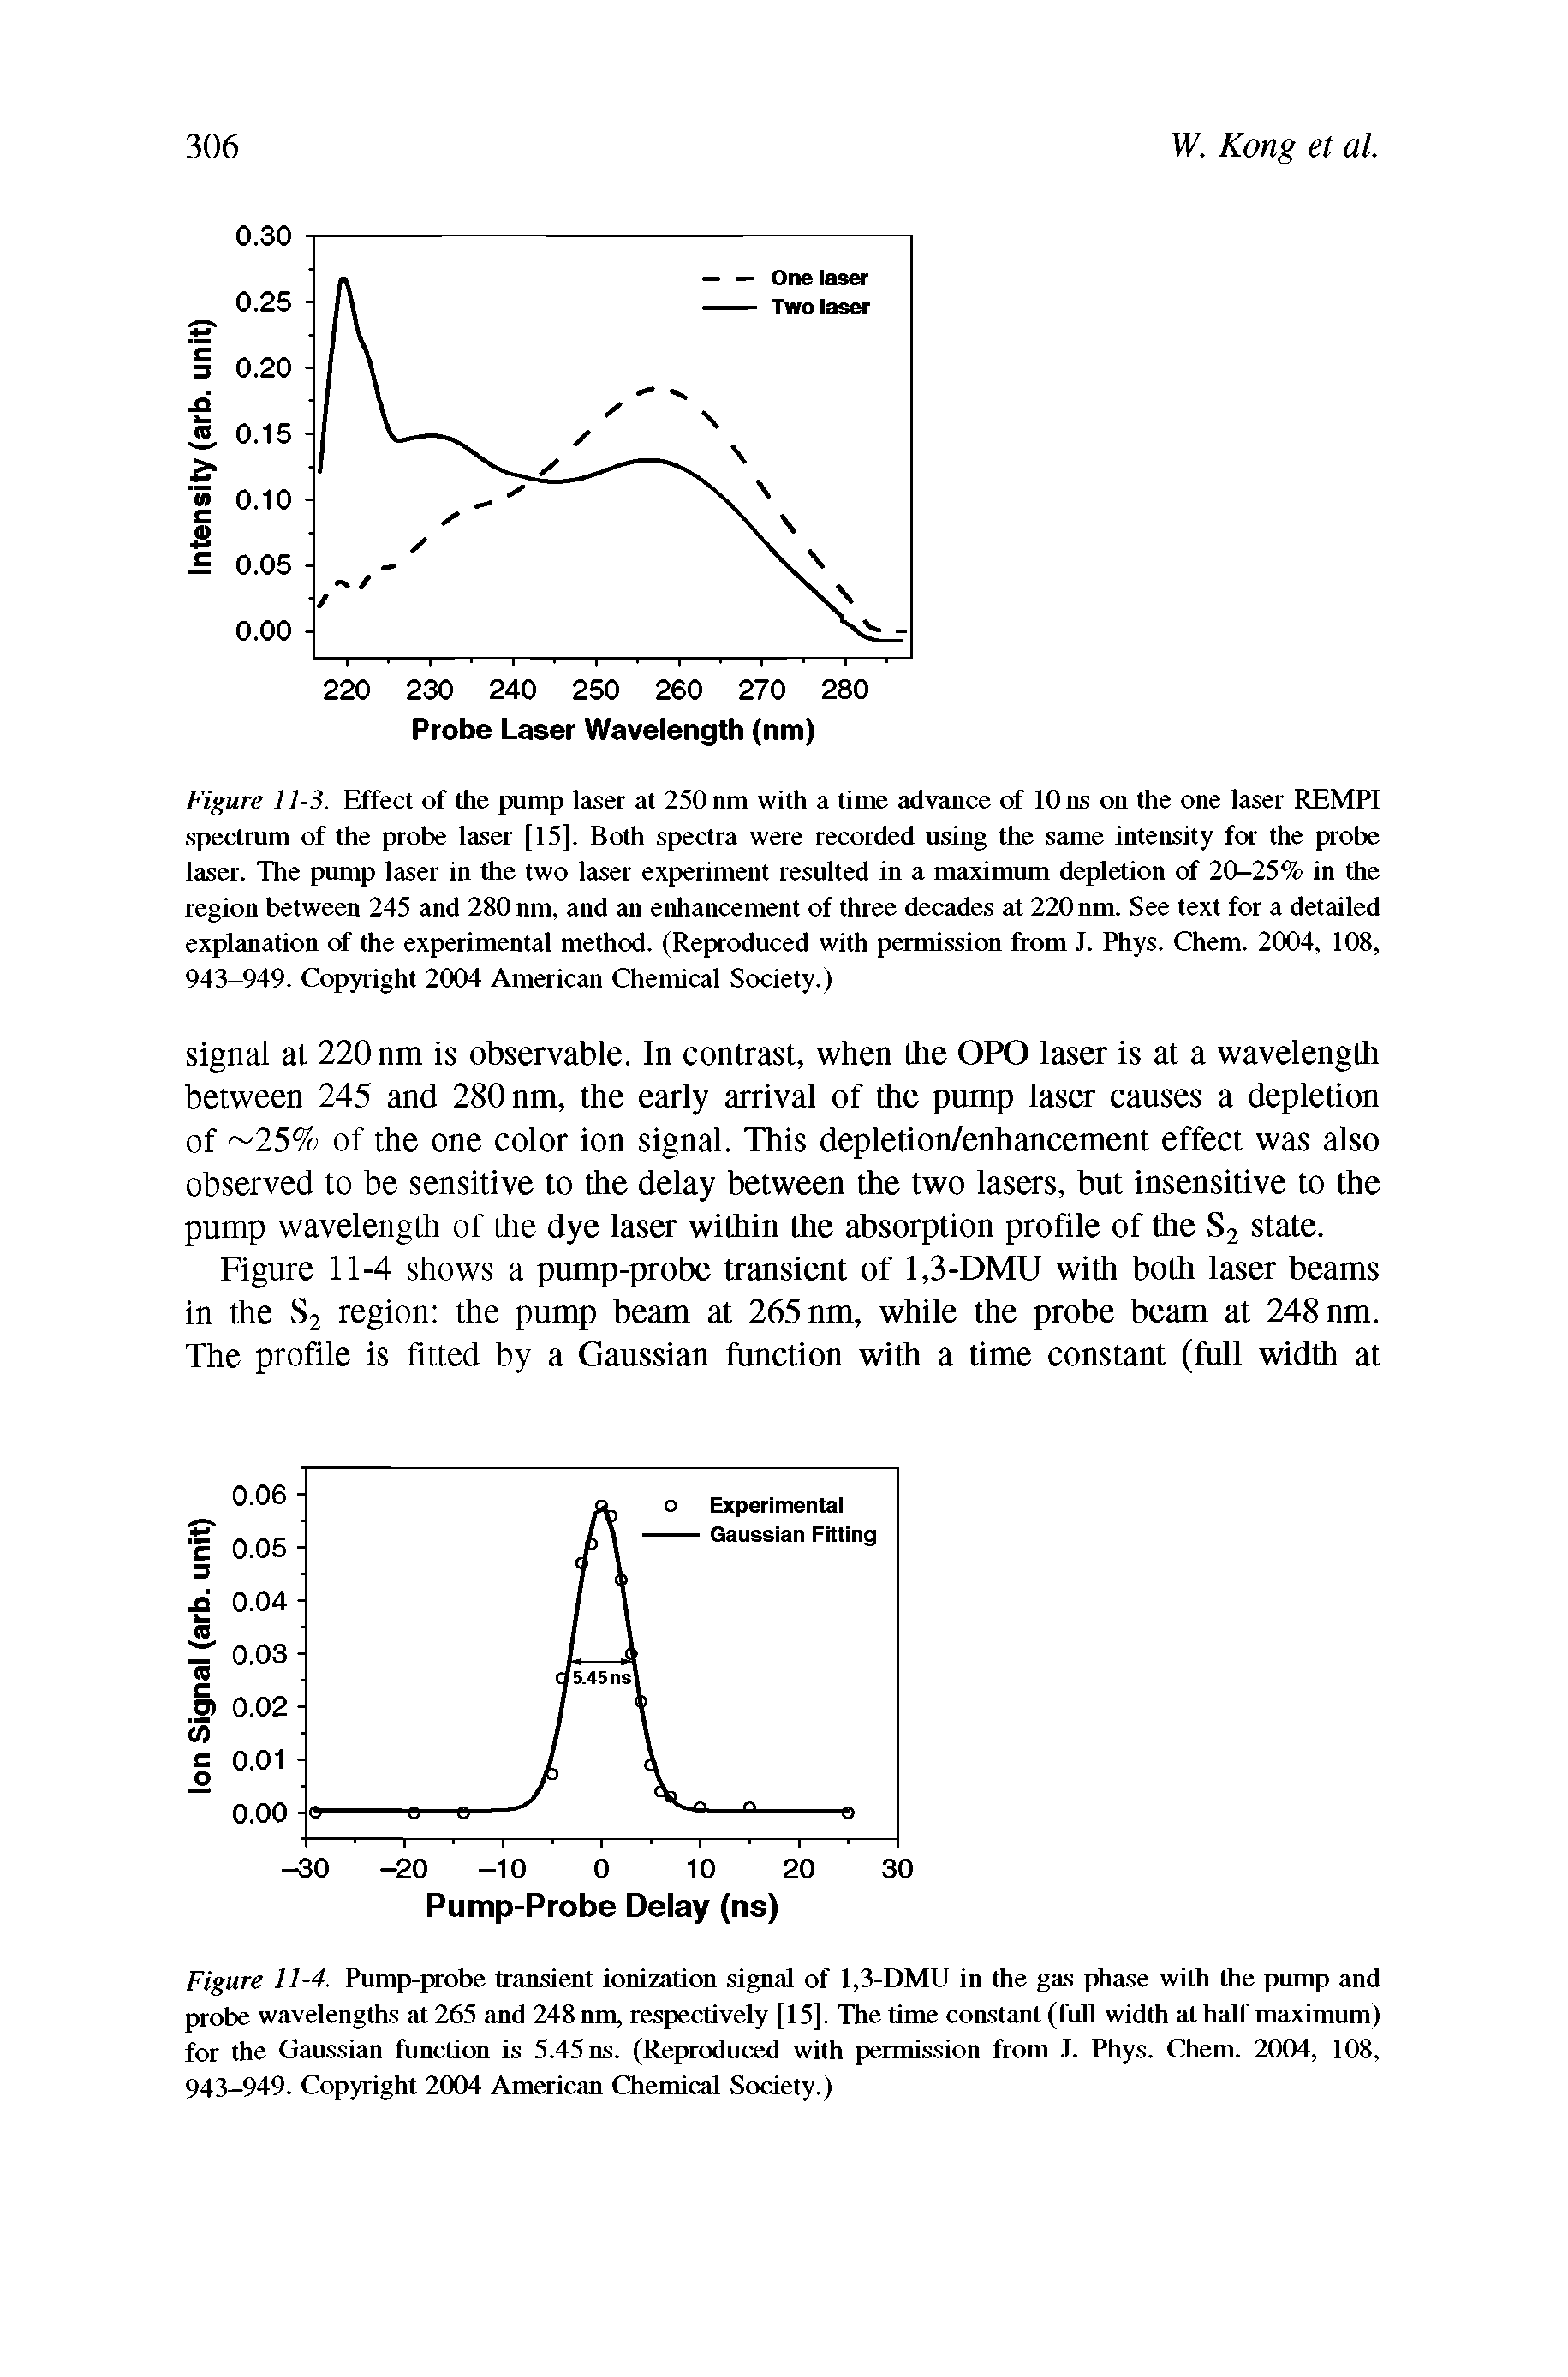 Figure 11-3. Effect of the pump laser at 250 nm with a time advance of 10 ns on the one laser REMPI spectrum of the probe laser [15]. Both spectra were recorded using the same intensity for the probe laser. The pump laser in the two laser experiment resulted in a maximum depletion of 20-25% in the region between 245 and 280 nm, and an enhancement of three decades at 220 nm. See text for a detailed explanation of the experimental method. (Reproduced with permission from J. Phys. Chem. 2004, 108, 943-949. Copyright 2004 American Chemical Society.)...